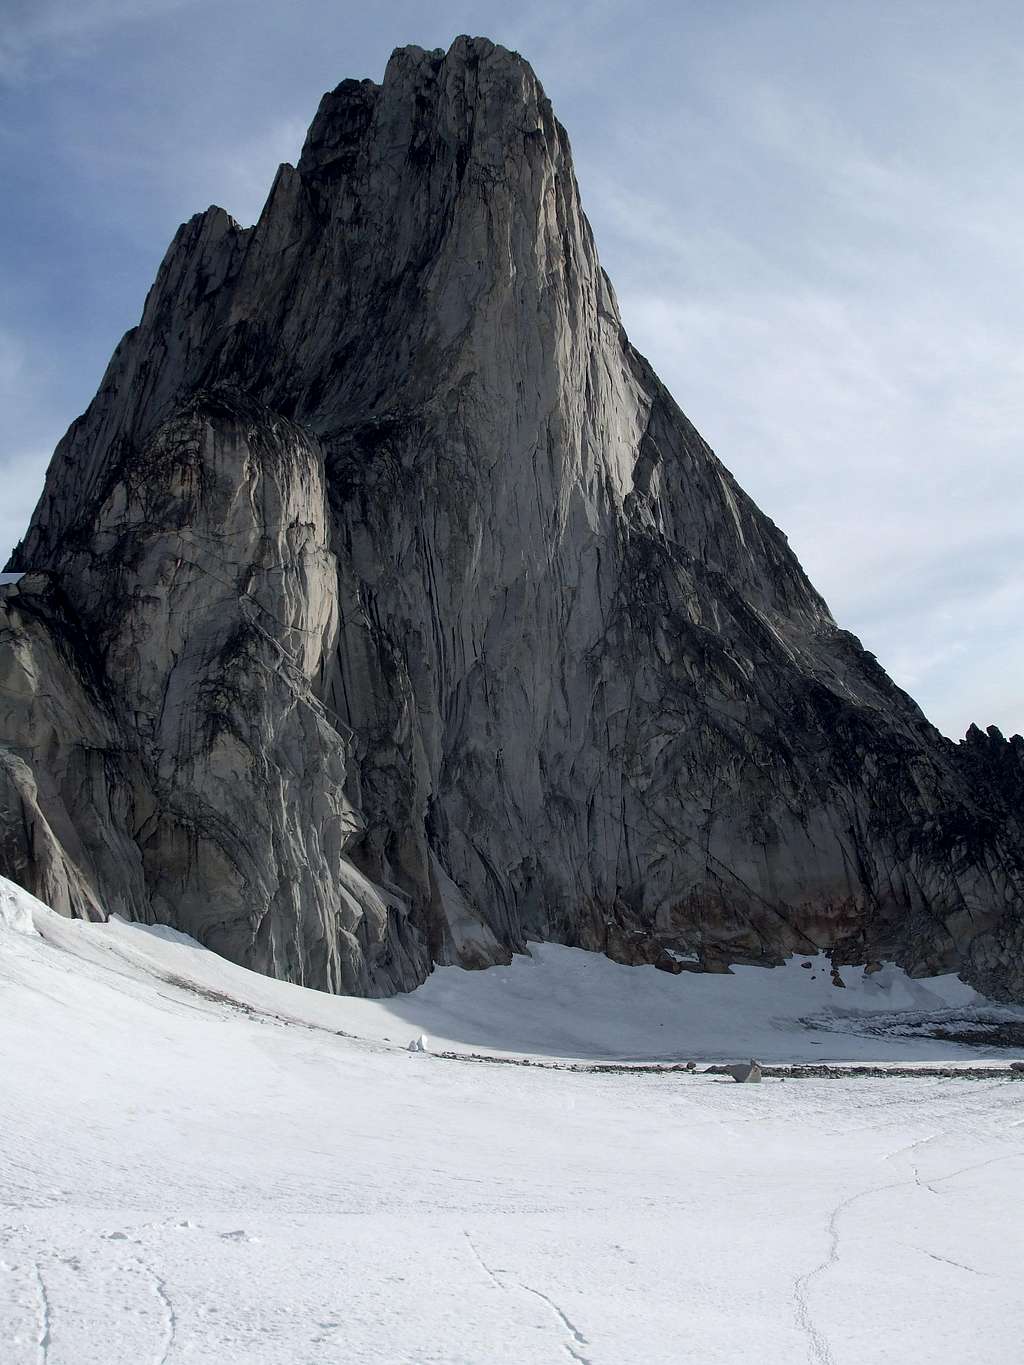 South face, Snowpatch Spire